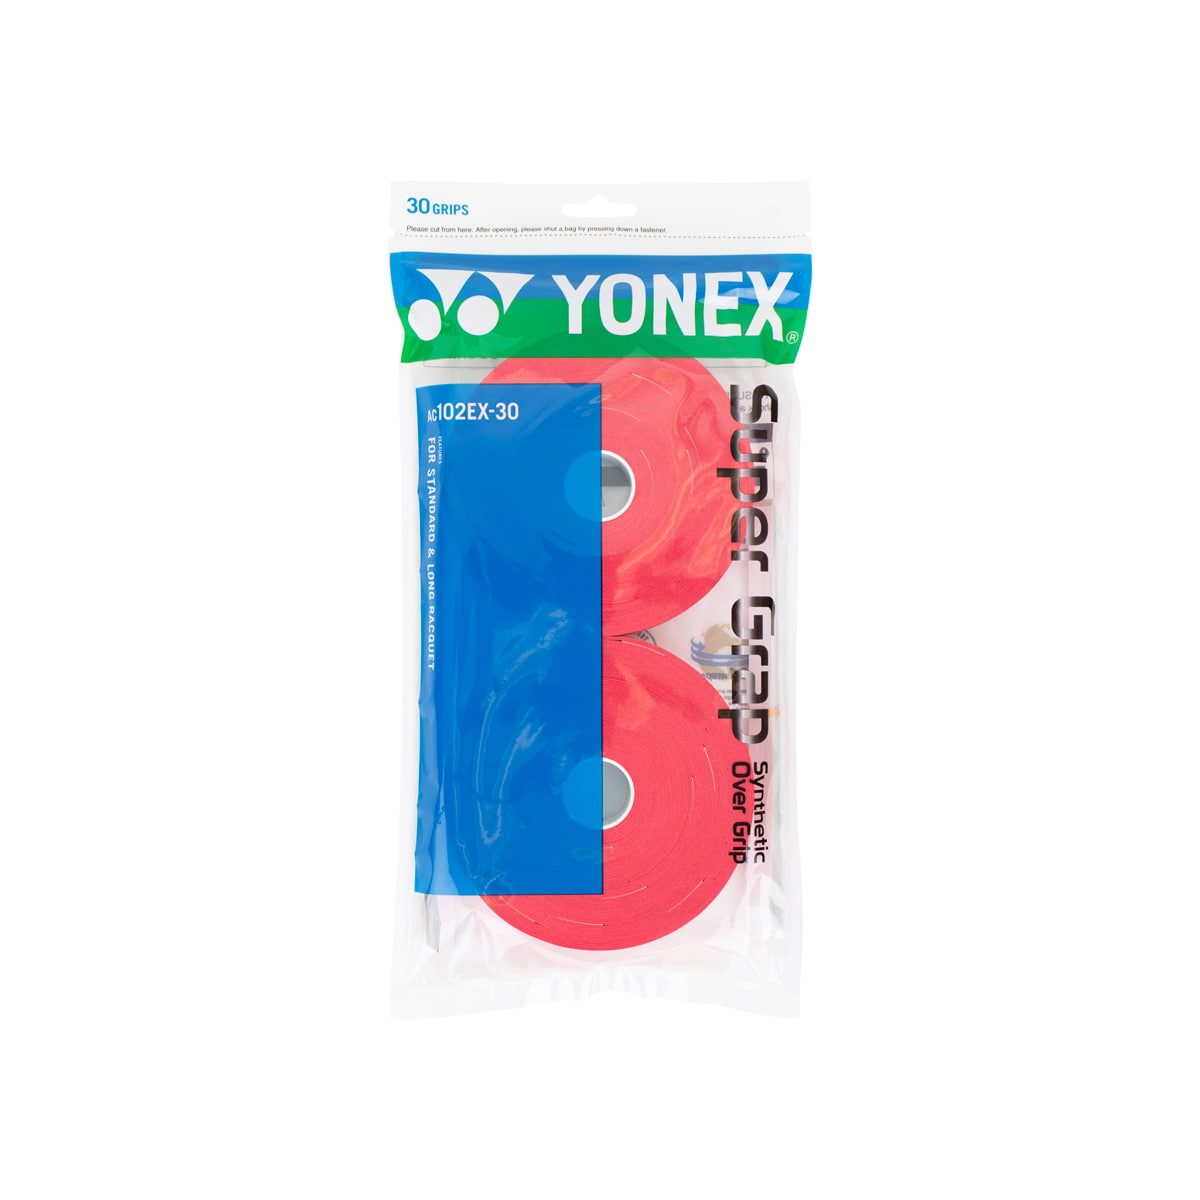 YONEX Super Grap Synthetic Over Grip 30 Stk. - Weinrot